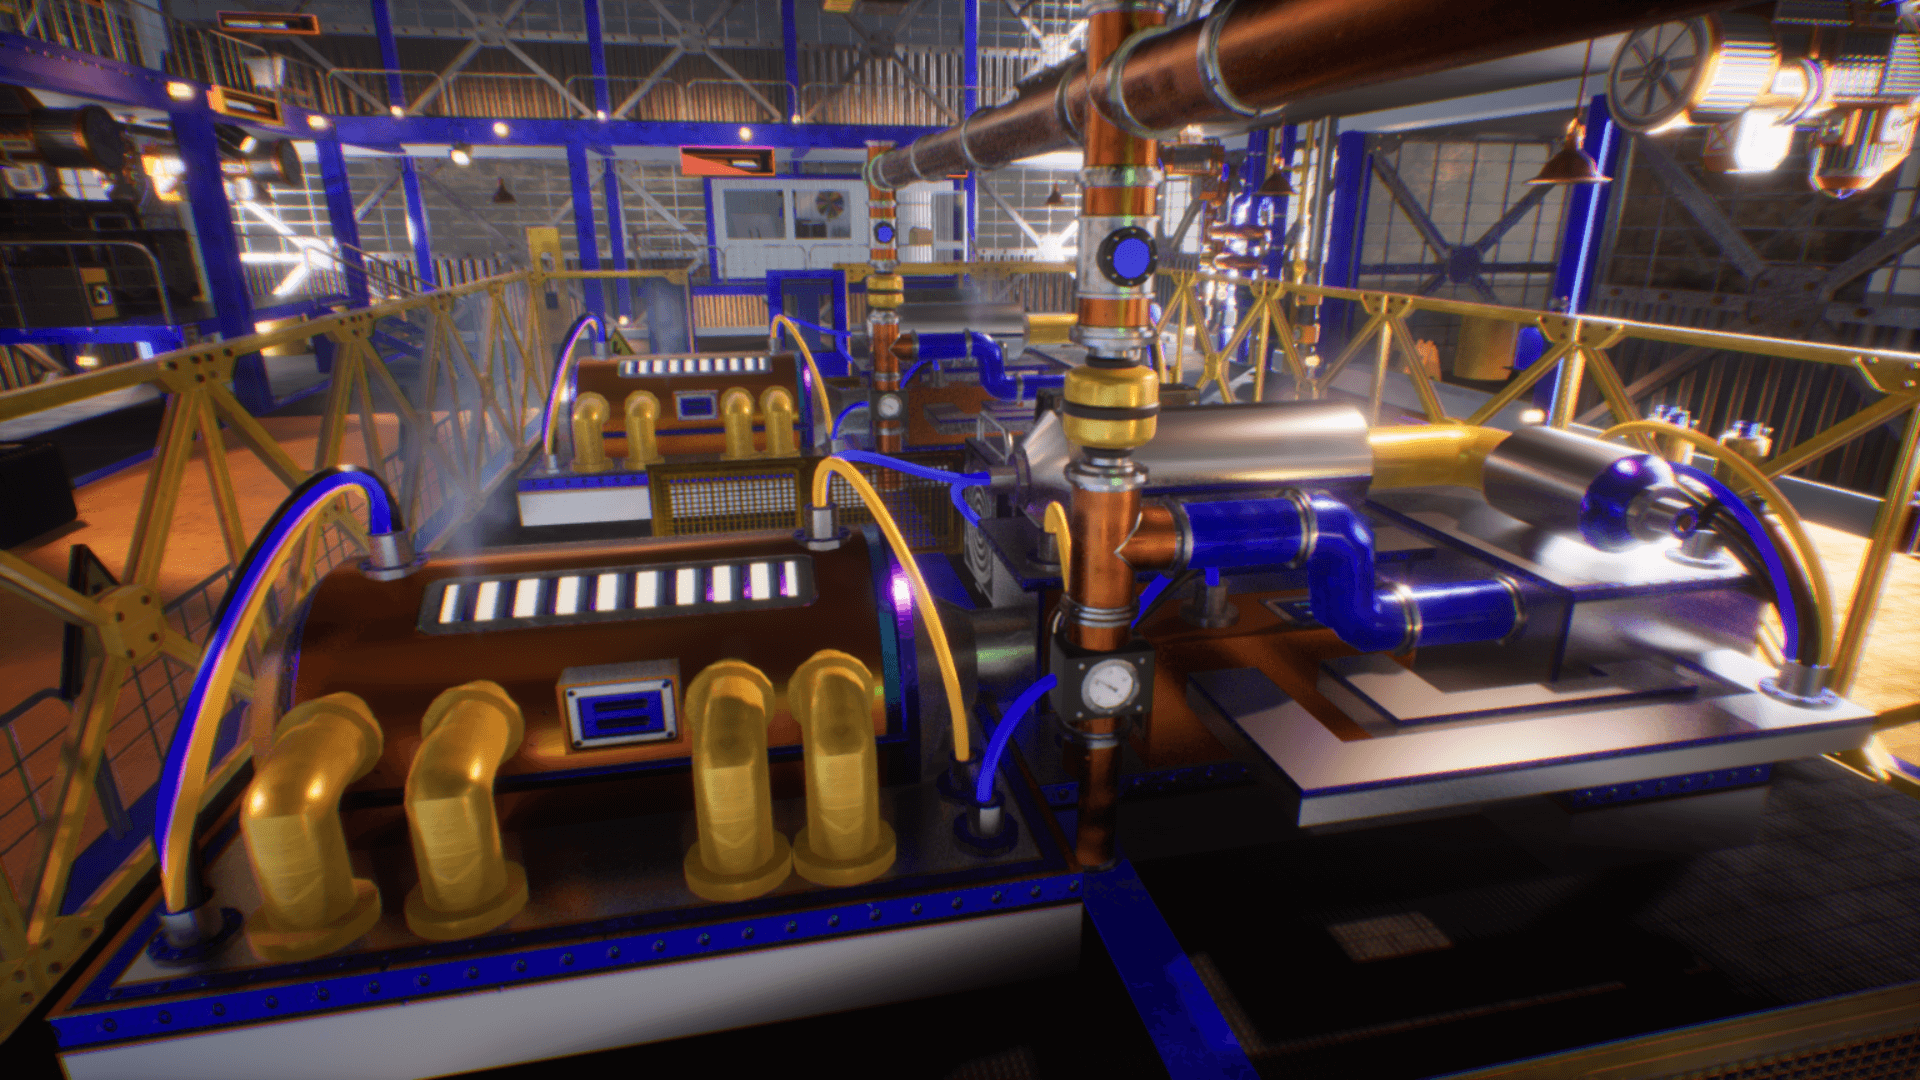 An image showing Industrial Hall asset pack, created with Unreal Engine.